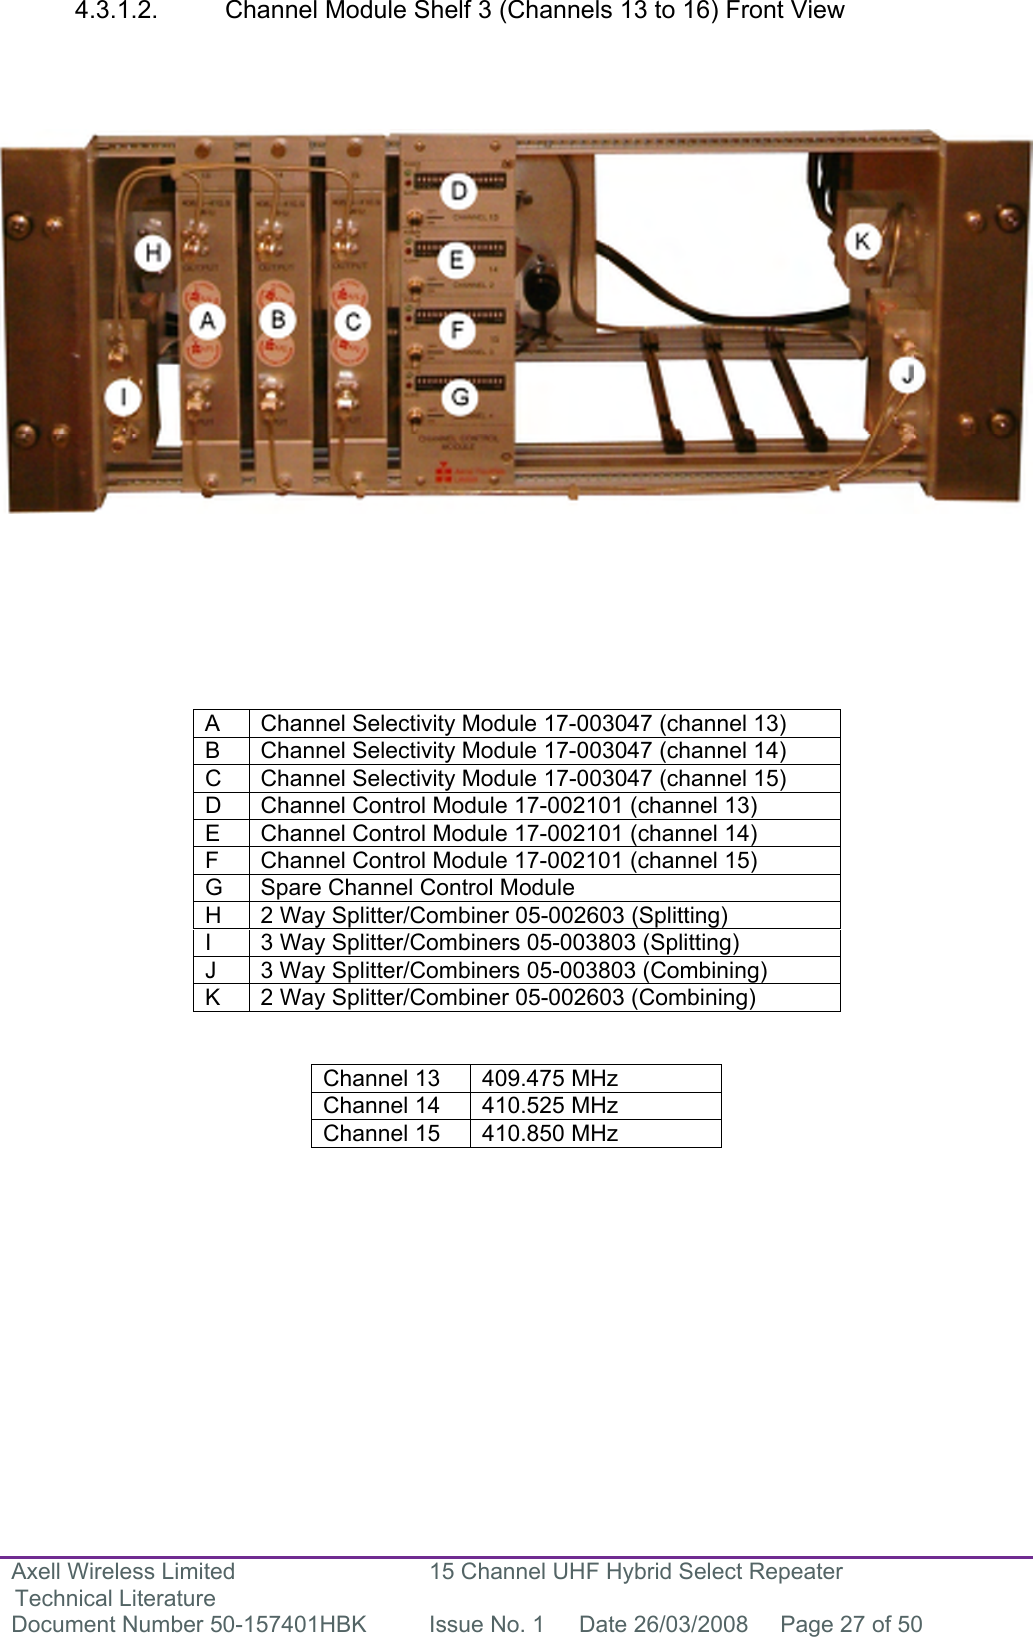 Axell Wireless Limited Technical Literature 15 Channel UHF Hybrid Select Repeater Document Number 50-157401HBK  Issue No. 1  Date 26/03/2008  Page 27 of 50   4.3.1.2.  Channel Module Shelf 3 (Channels 13 to 16) Front View                           A  Channel Selectivity Module 17-003047 (channel 13) B  Channel Selectivity Module 17-003047 (channel 14) C  Channel Selectivity Module 17-003047 (channel 15) D  Channel Control Module 17-002101 (channel 13) E  Channel Control Module 17-002101 (channel 14) F  Channel Control Module 17-002101 (channel 15) G  Spare Channel Control Module H  2 Way Splitter/Combiner 05-002603 (Splitting) I  3 Way Splitter/Combiners 05-003803 (Splitting) J  3 Way Splitter/Combiners 05-003803 (Combining) K  2 Way Splitter/Combiner 05-002603 (Combining)   Channel 13  409.475 MHz Channel 14  410.525 MHz Channel 15  410.850 MHz        